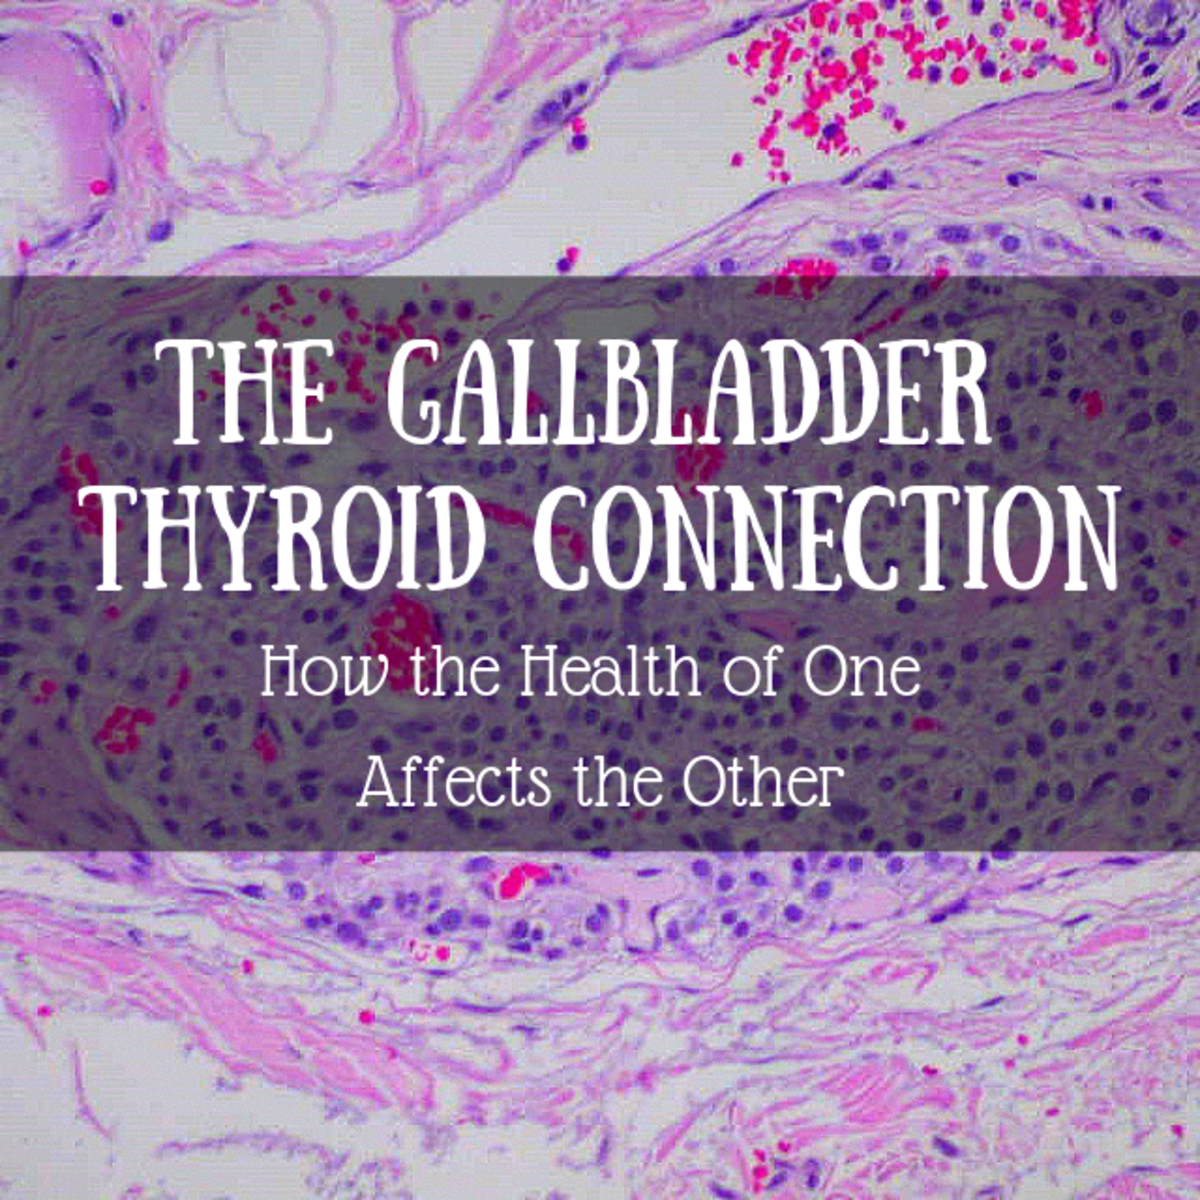 The Gallbladder Thyroid Connection: How the Health of One Affects the Other